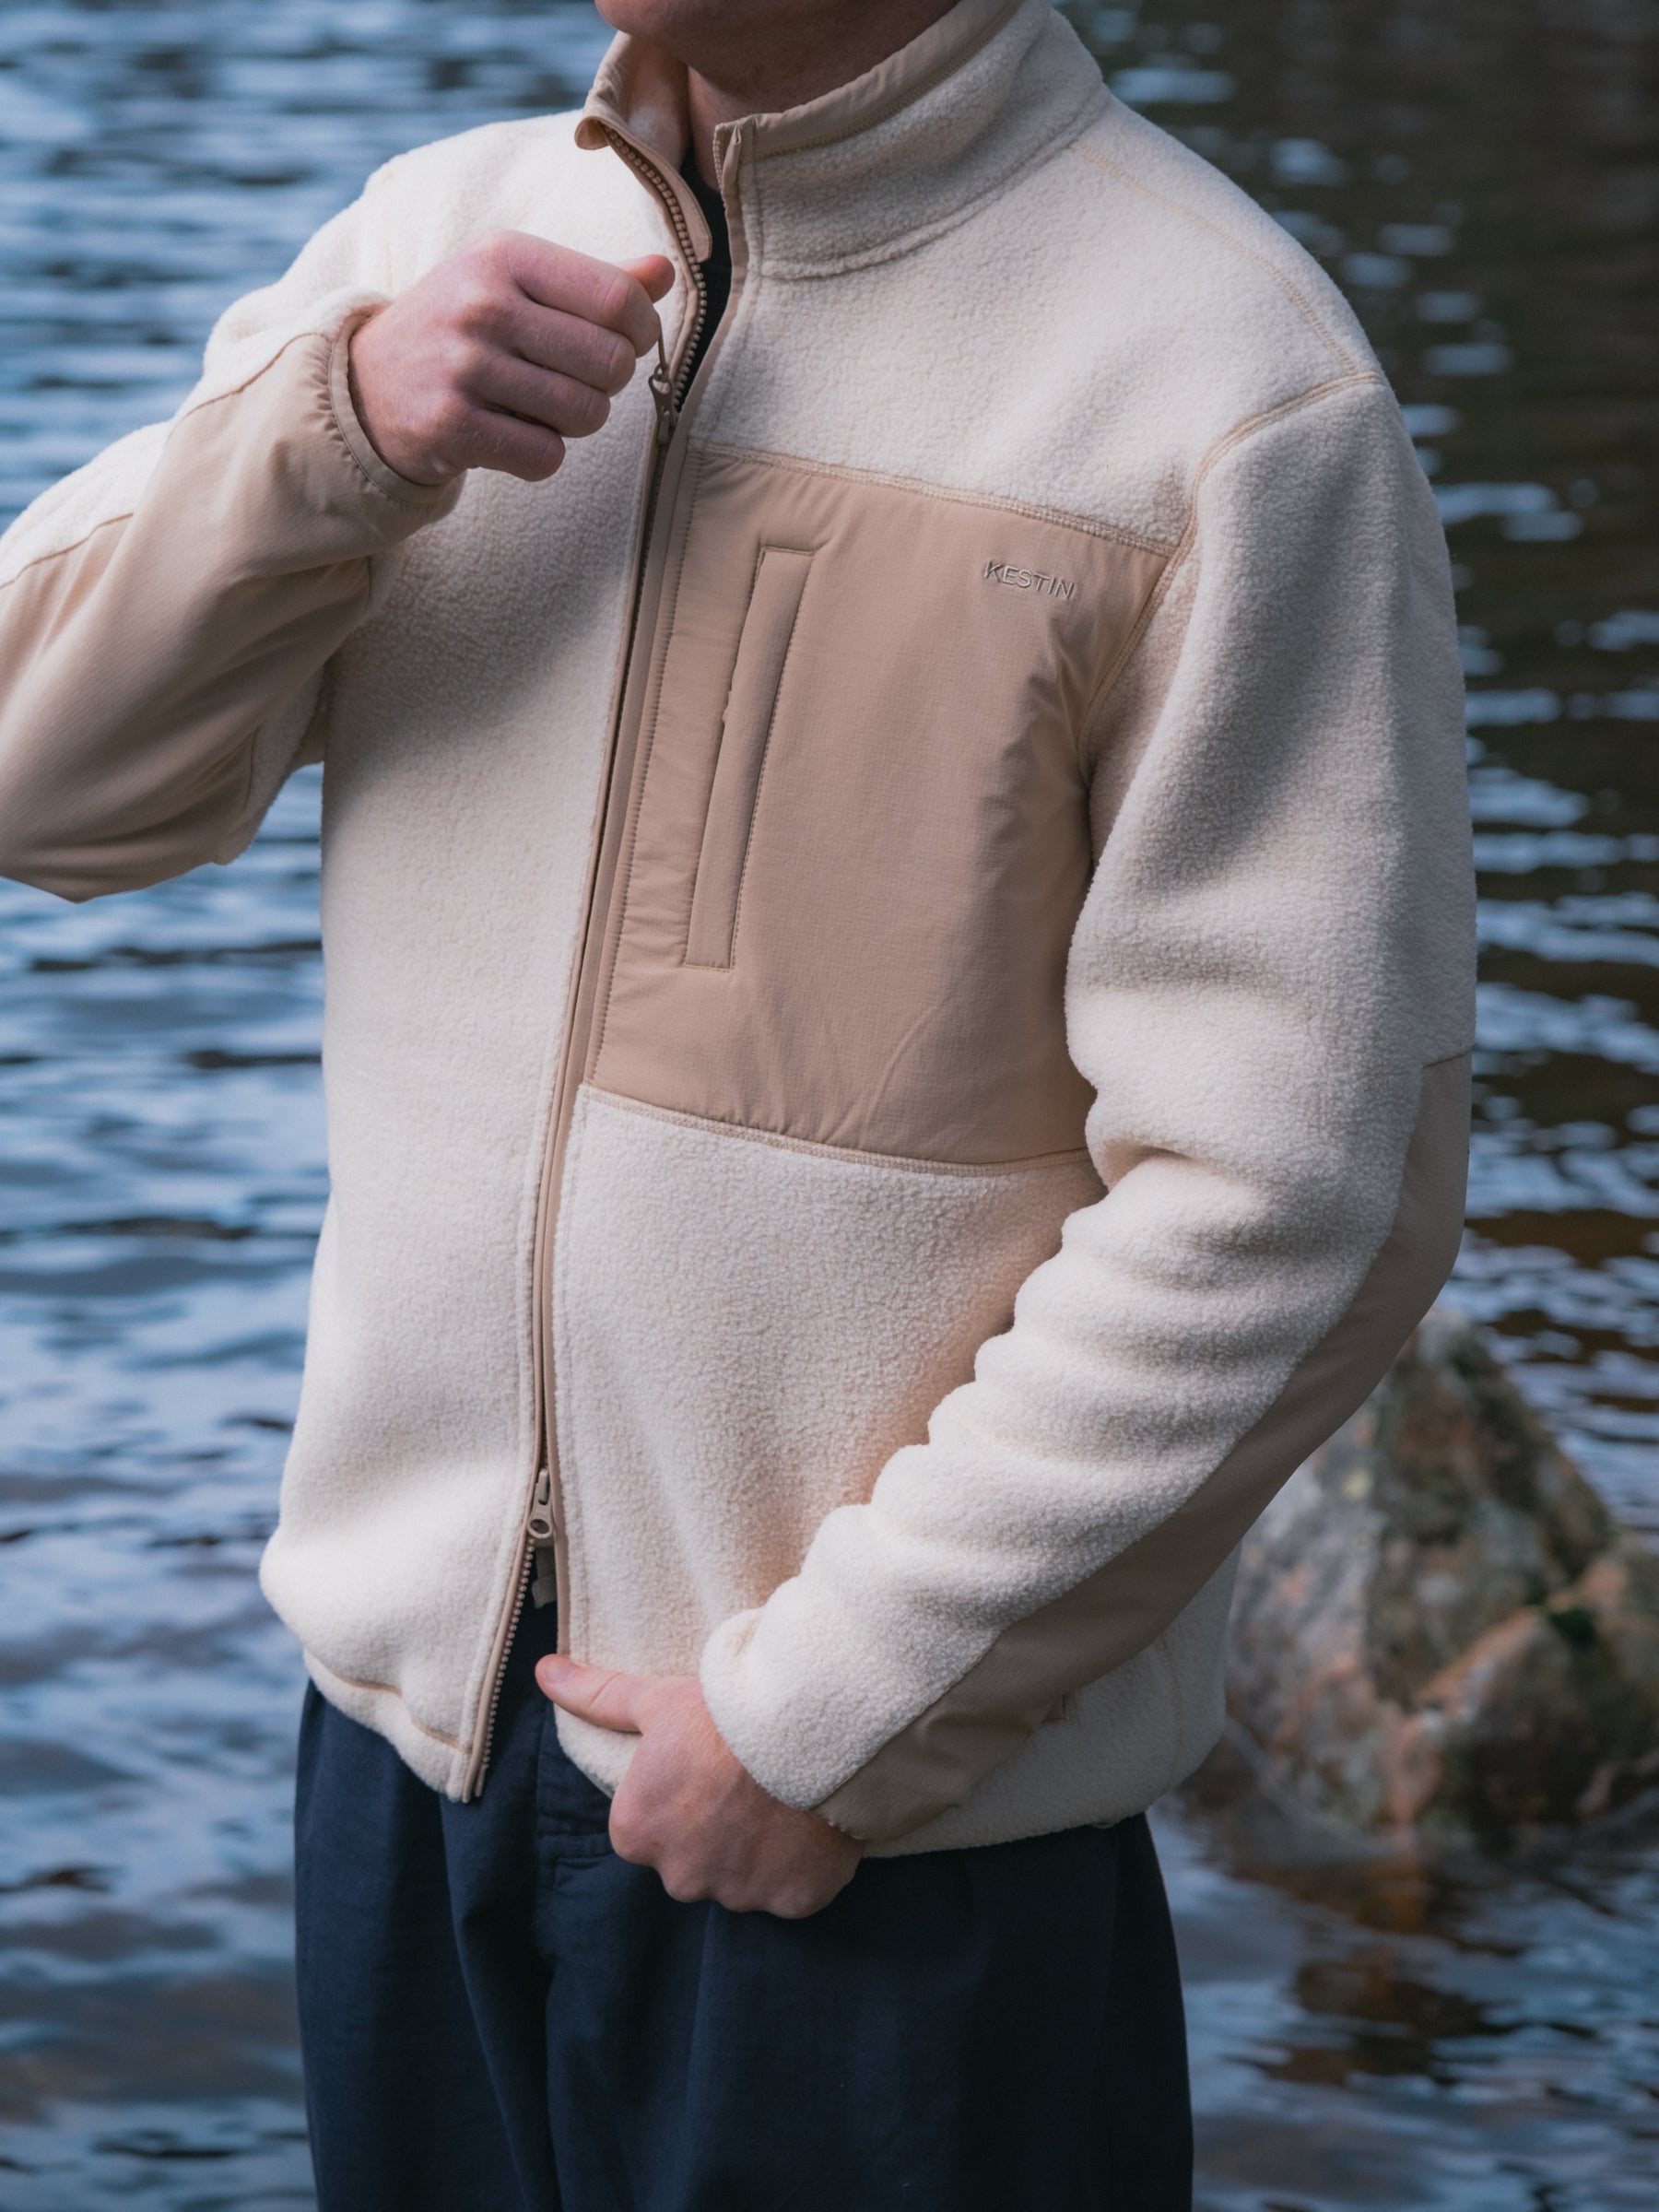 A man zipping up a cream fleece jacket with water in the background.